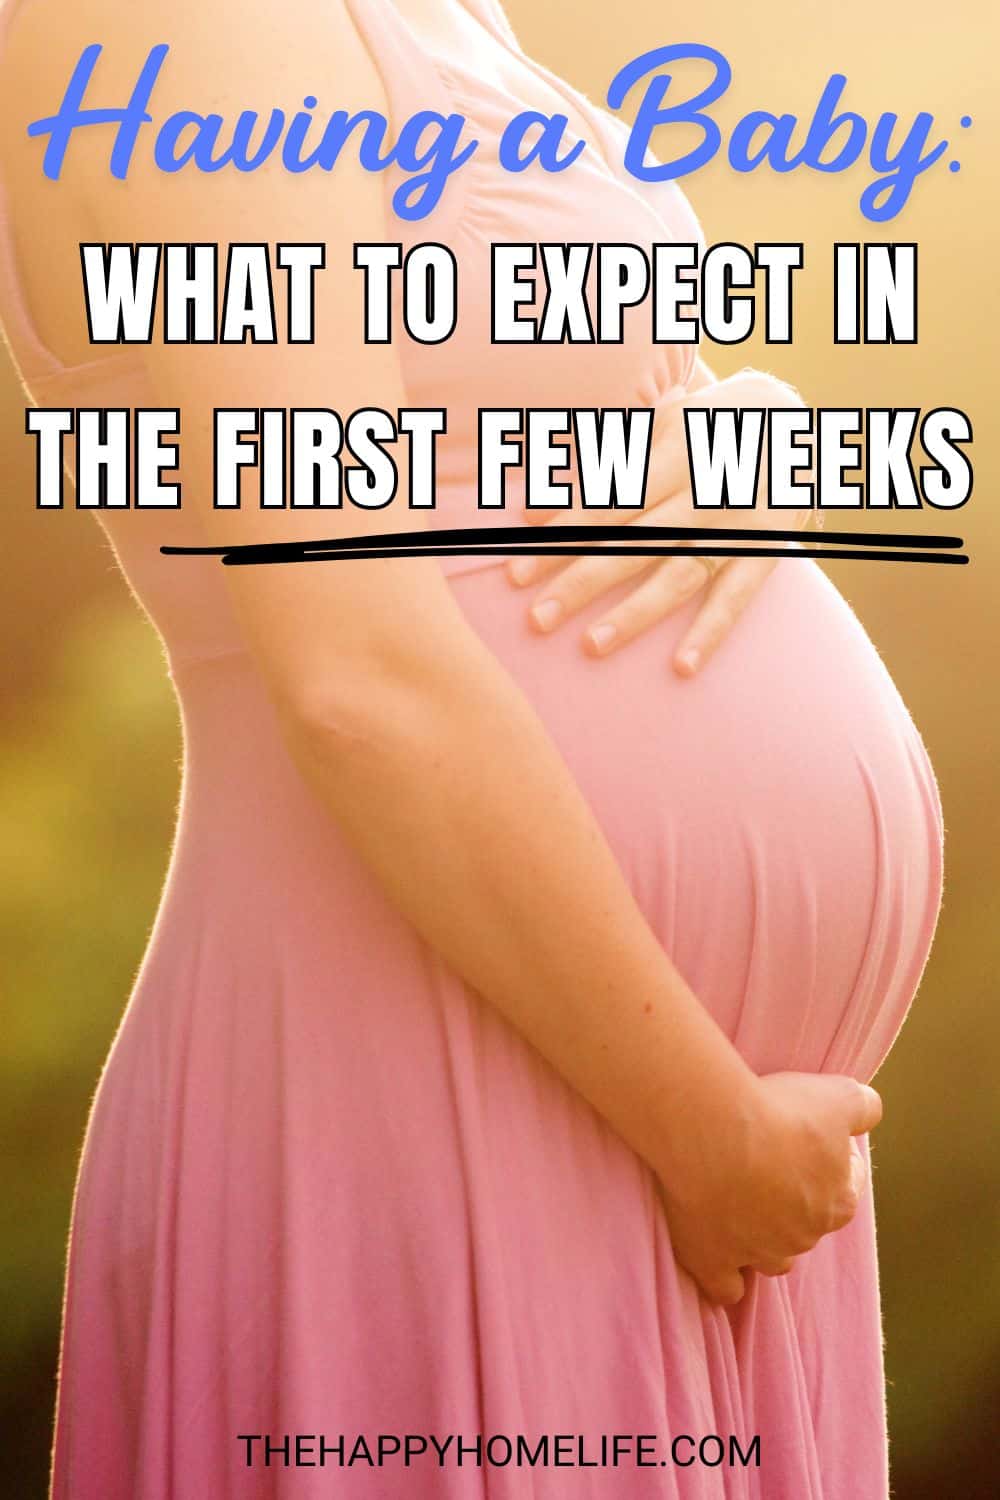 pregnant woman with text overlay "Having A Baby: What To Expect In The First Few Weeks"